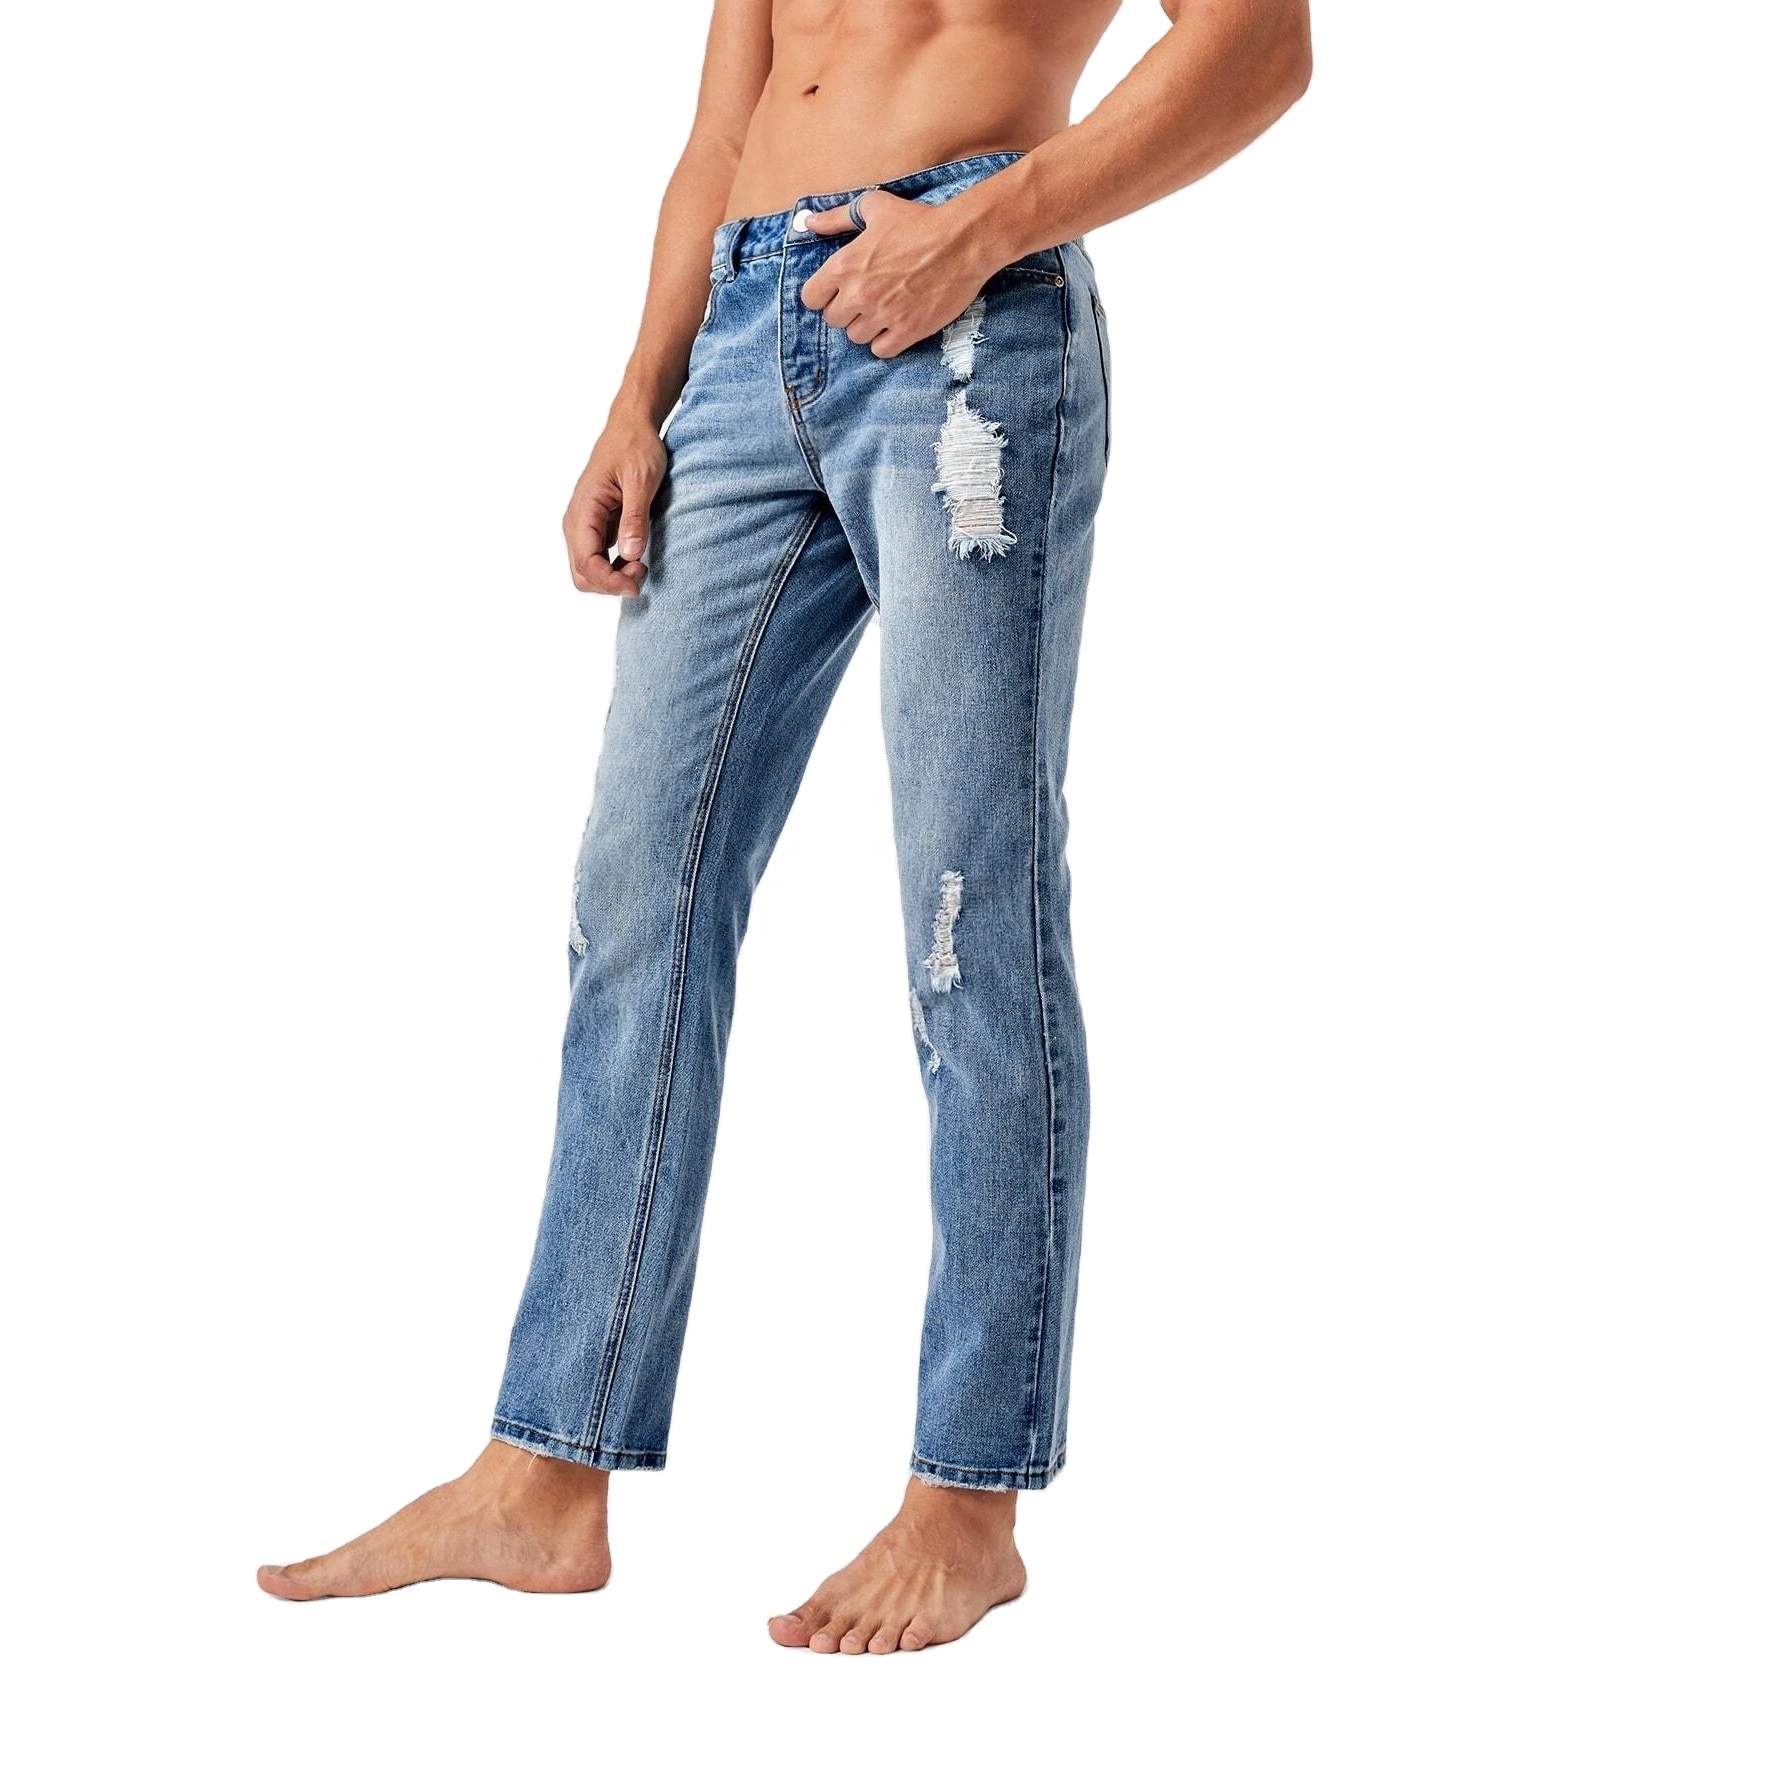 known name brand jeans ripped pants blue skinny jeans for men